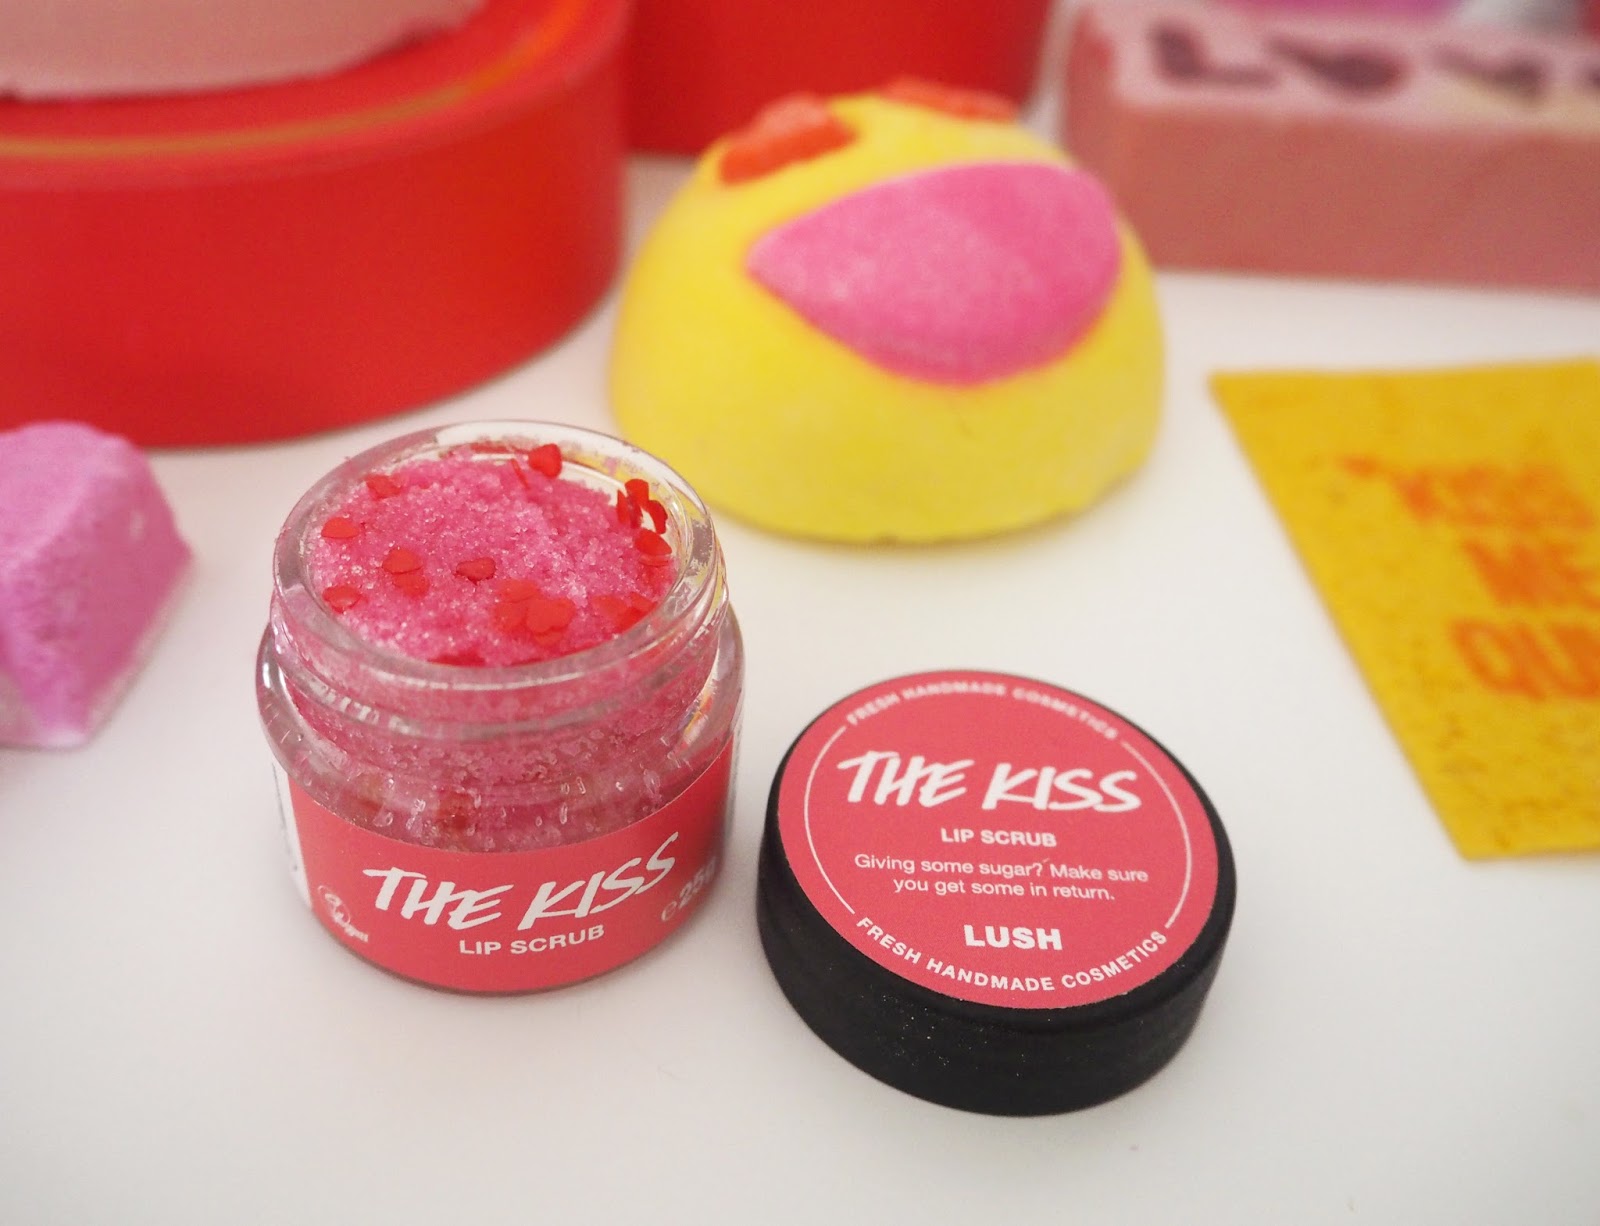 Lush Cosmetics Valentines 2017 Collection, Katie Kirk Loves, Lush Cosmetics UK, Lush 2017, Beauty Blogger, UK Blogger, Gifts For Her, Valentine's Day Gifts, Gift Ideas, Lush Review, Lush Gifts, Bath & Body Products, Blogger Review